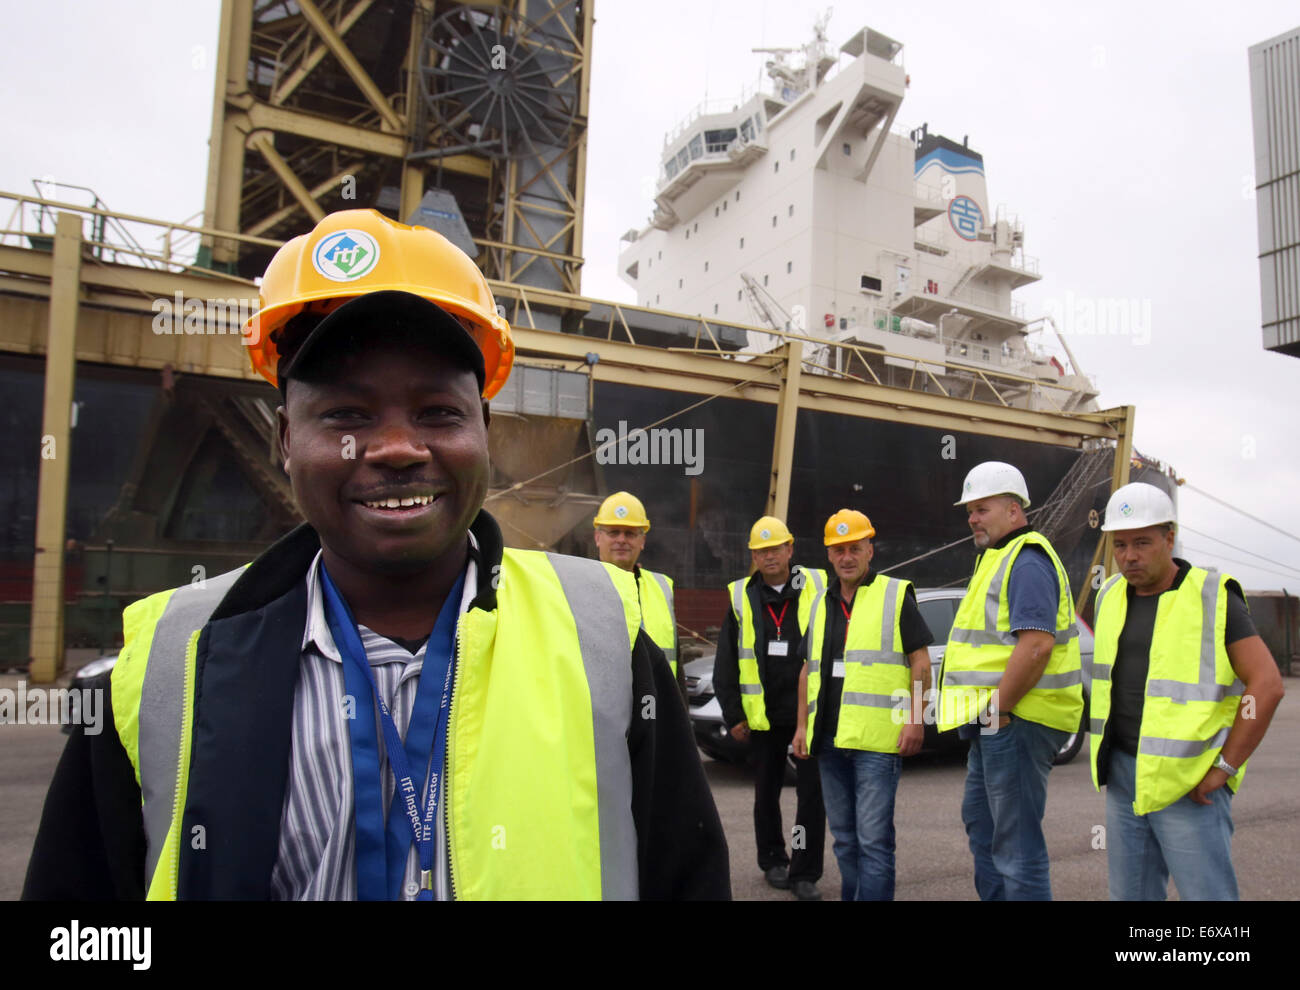 Rostock, Germany. 1st Sept, 2014. Inspector of the 'International Transport Workers' Federation (ITF)', Hamani Amadou (front) and union representatives stand in front of the grain cargo ship Mangan Trader in the seaport of Rostock, Germany, ß1 September 2014. The ITF has launched a one-week initiative around various seaports along the Batlic Sea, to inspect the living and working conditions of sailors onboard cargo vessles which sail under low-cost foreign flags. Credit:  dpa picture alliance/Alamy Live News Stock Photo